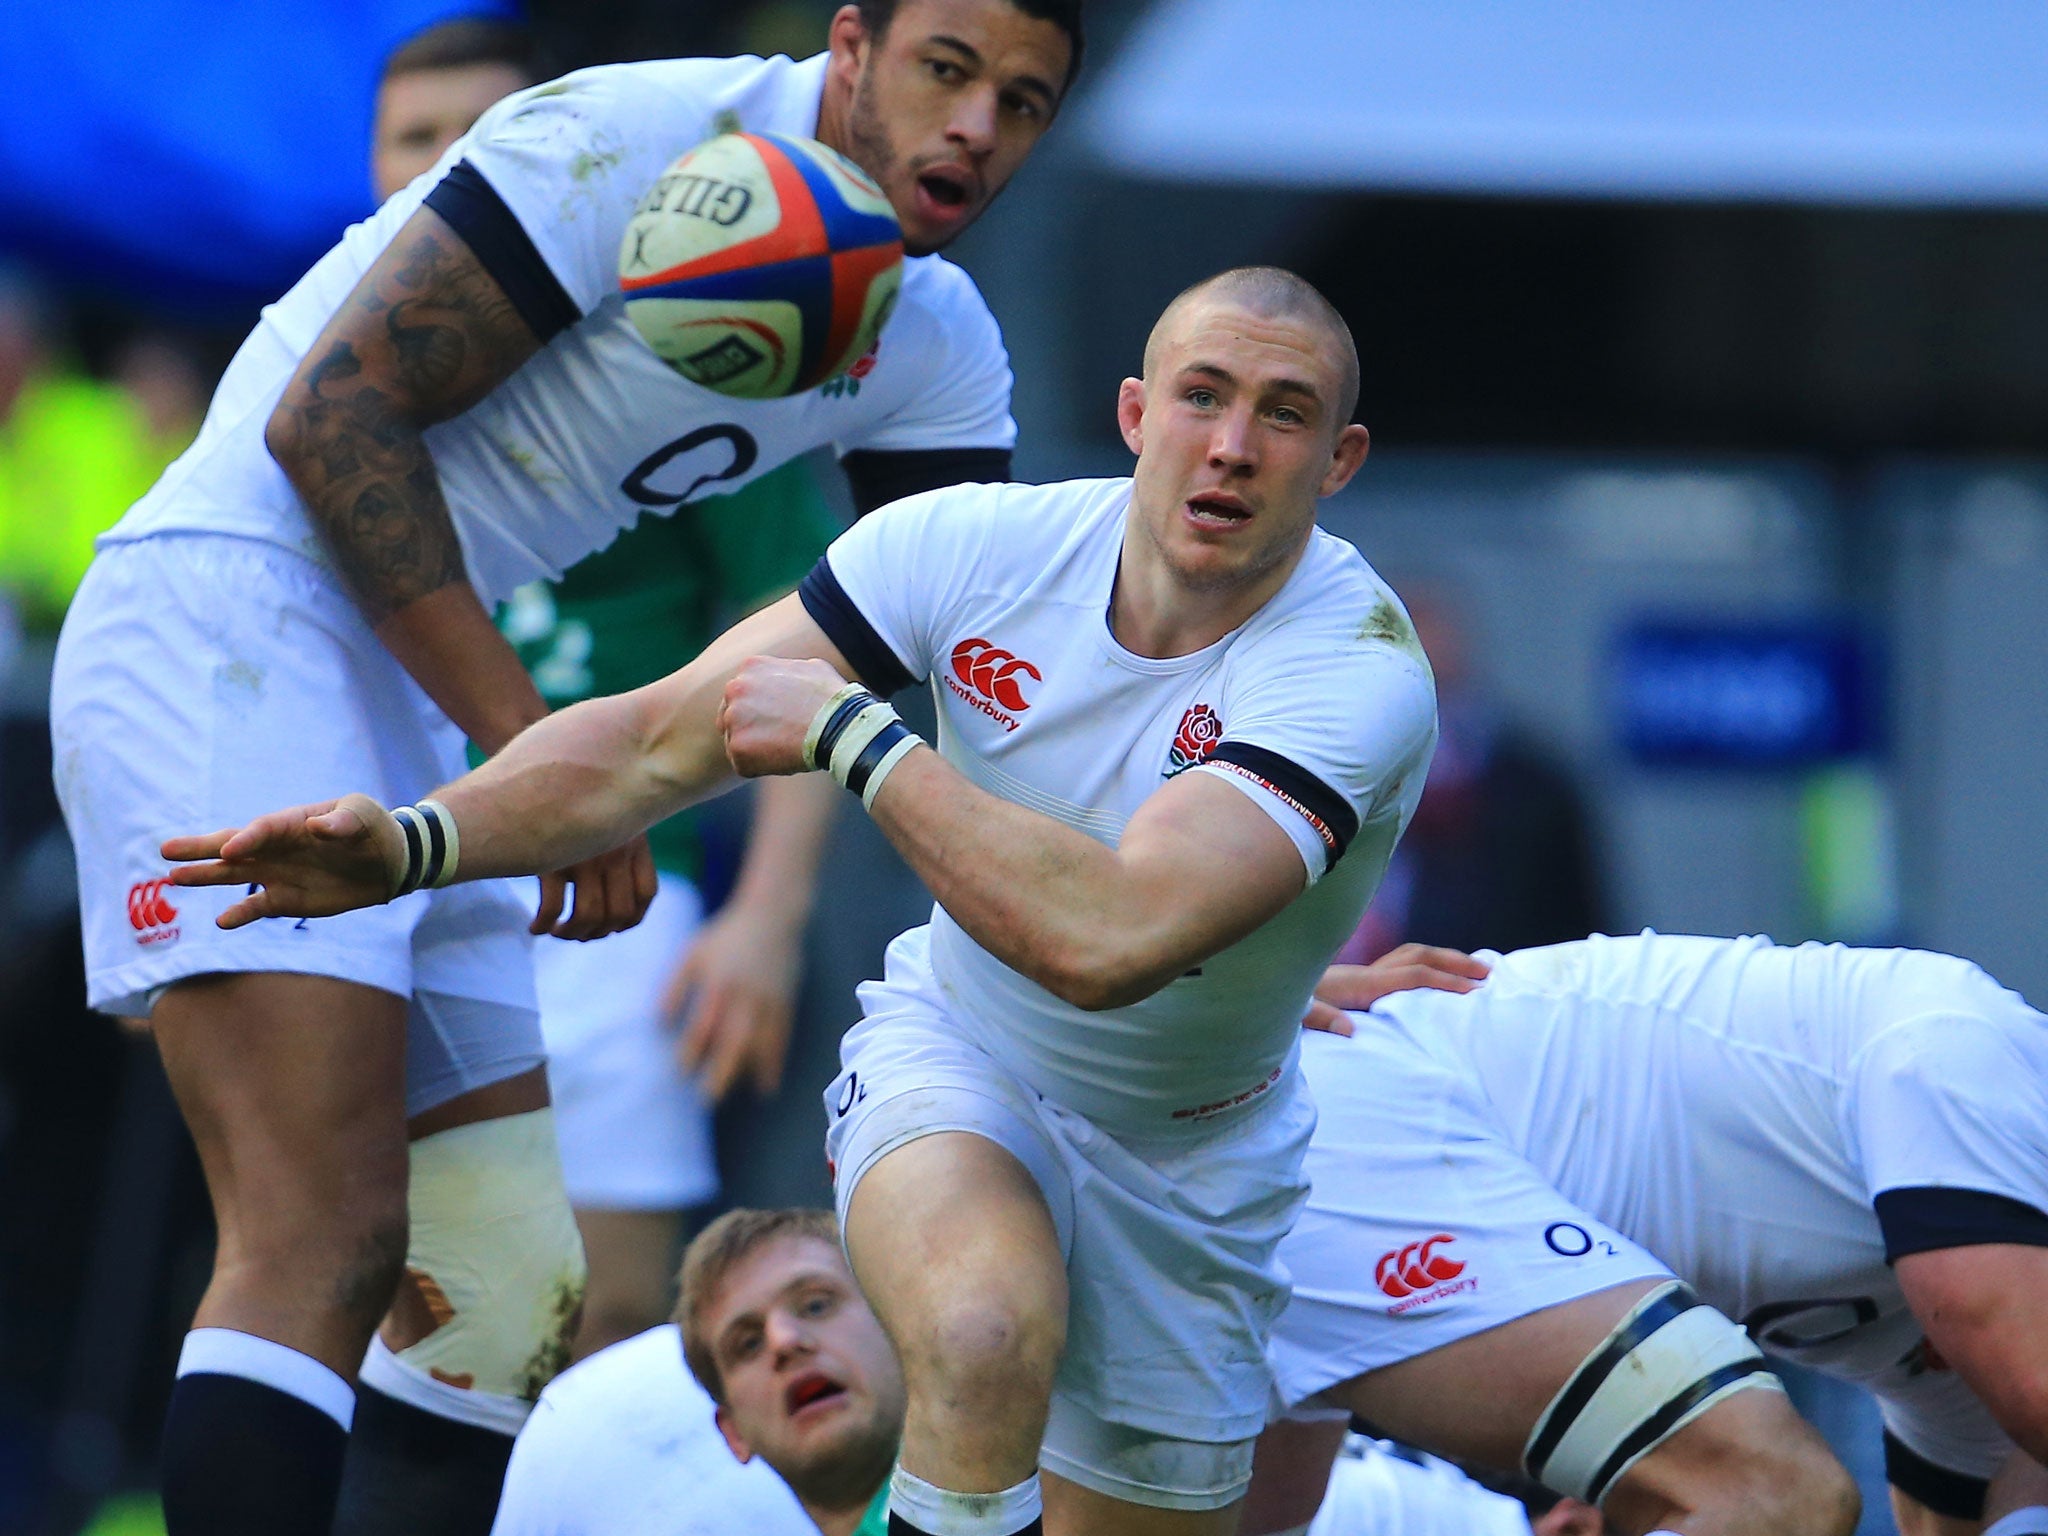 Mike Brown was superb in England's win